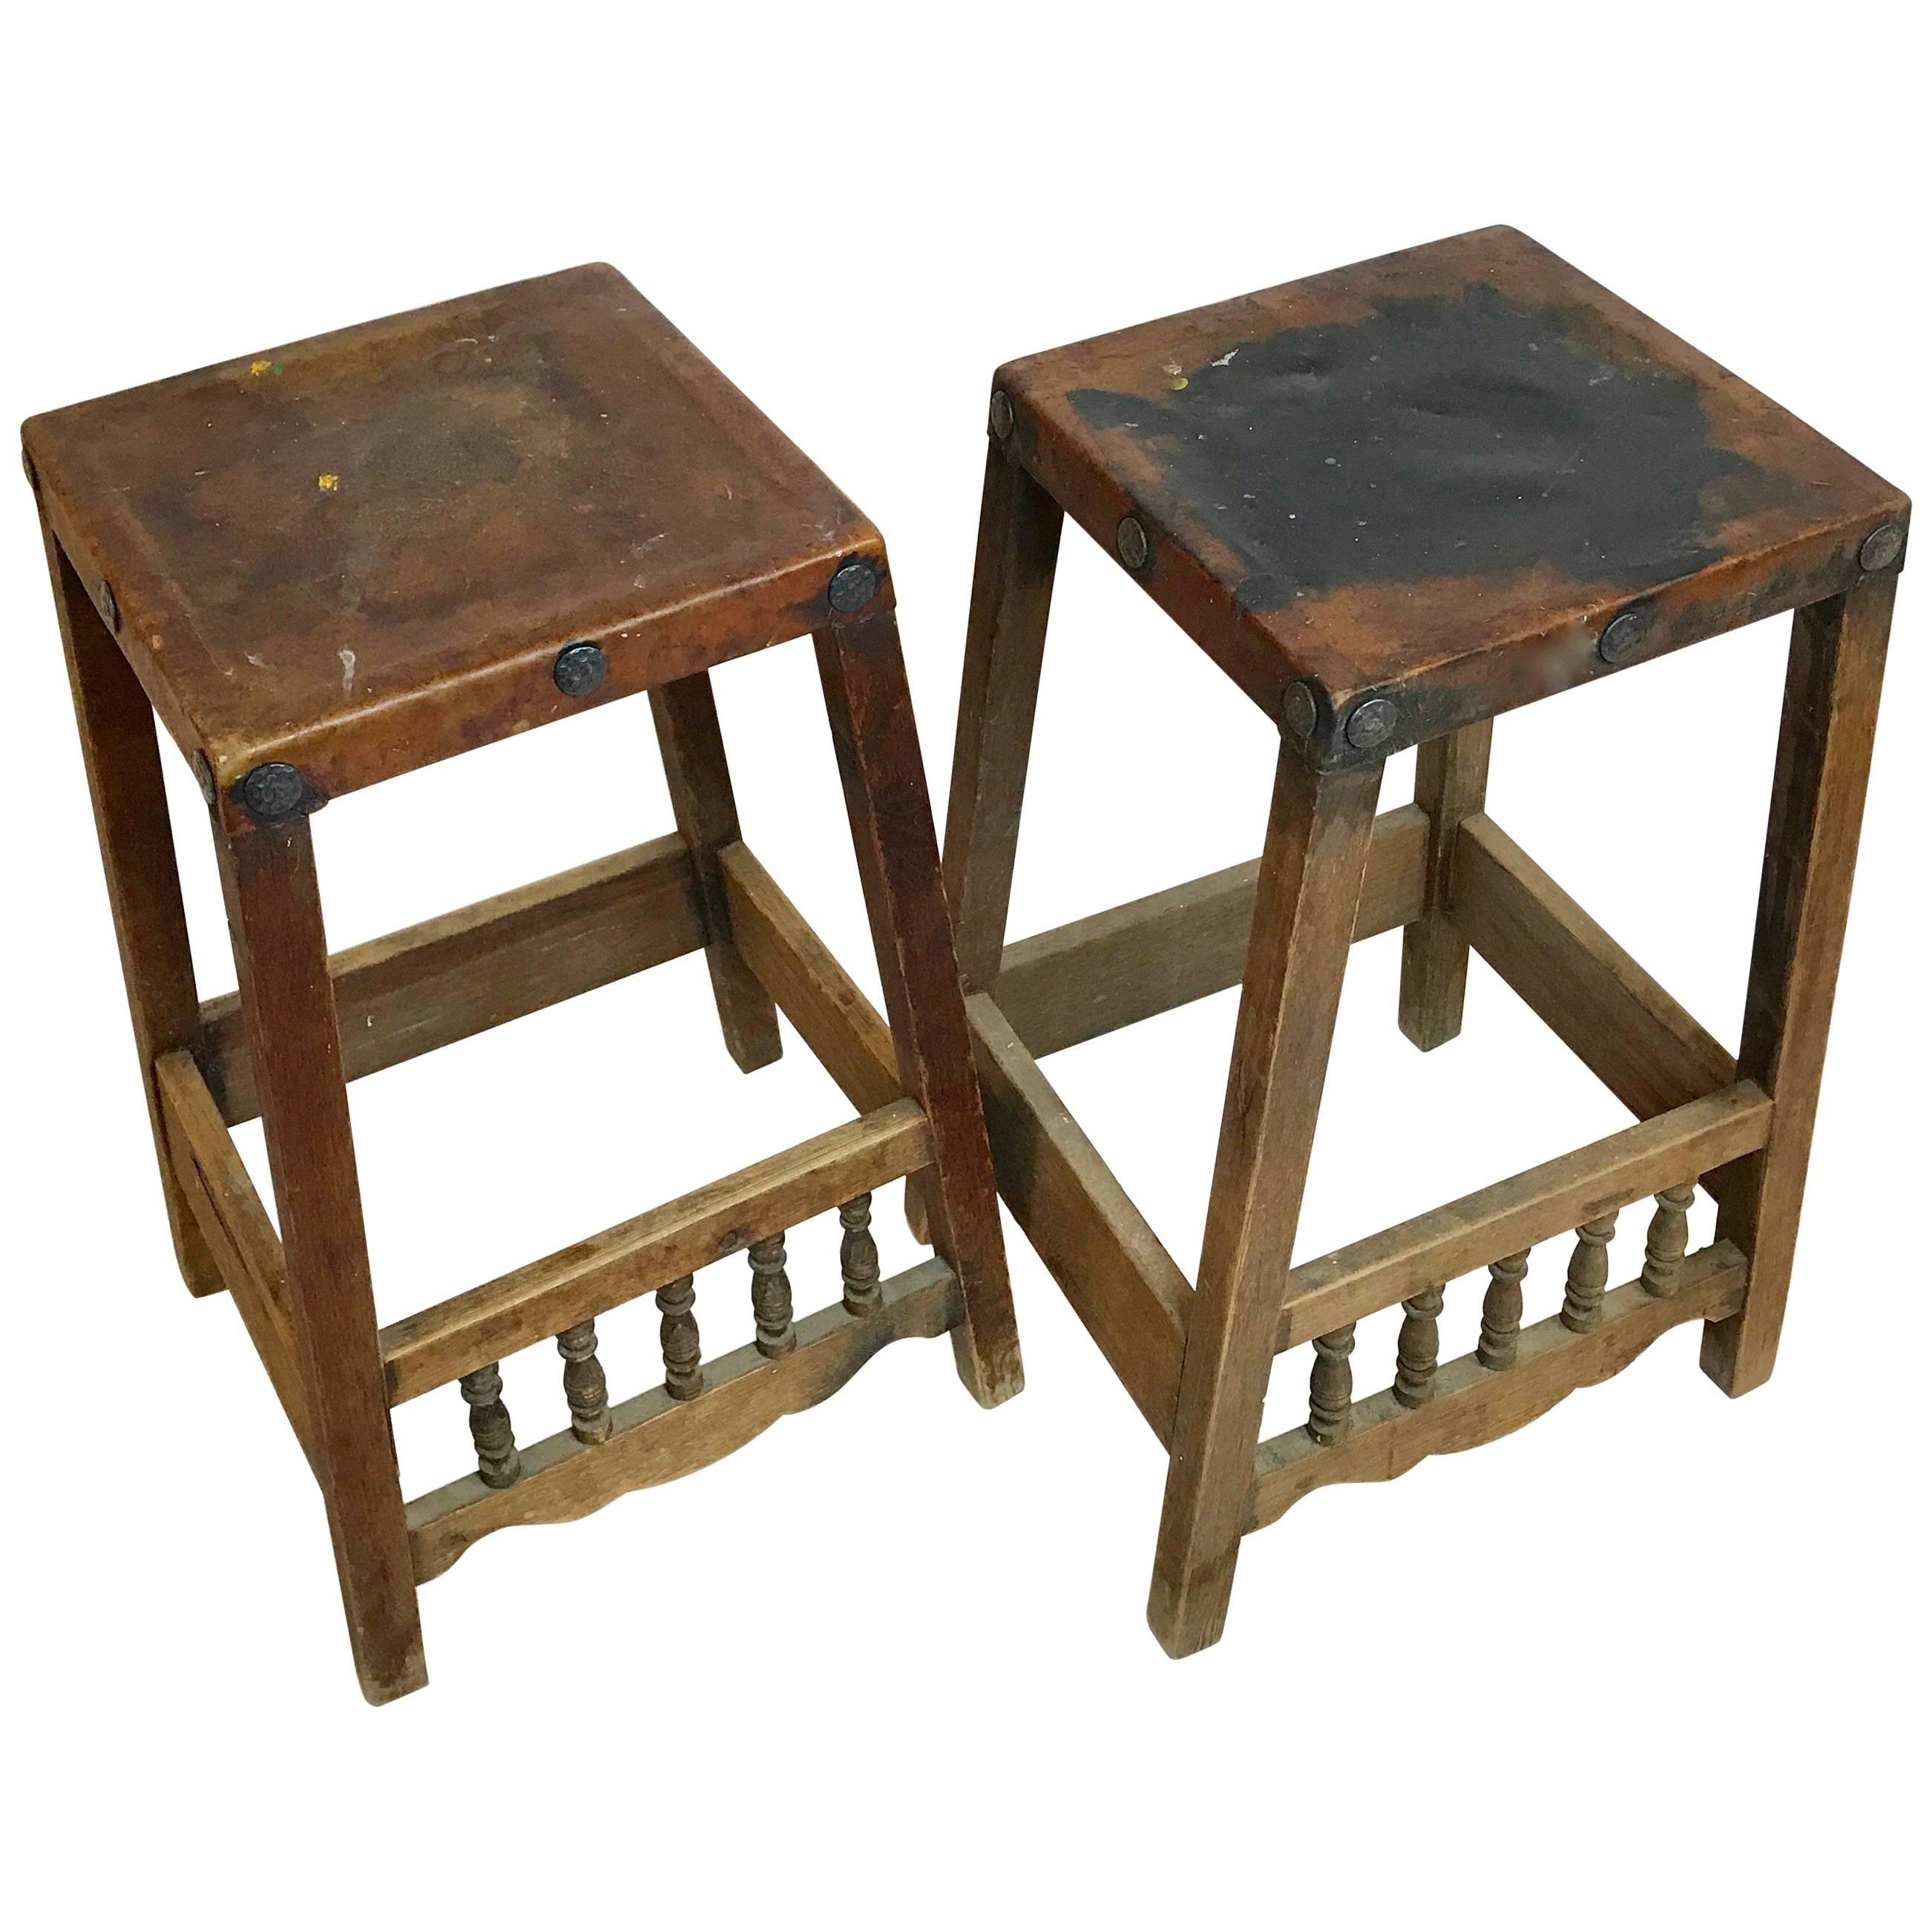 Early American Rustic Folk Art Leather & Wood with Hand-Forged Detail Bar Stools